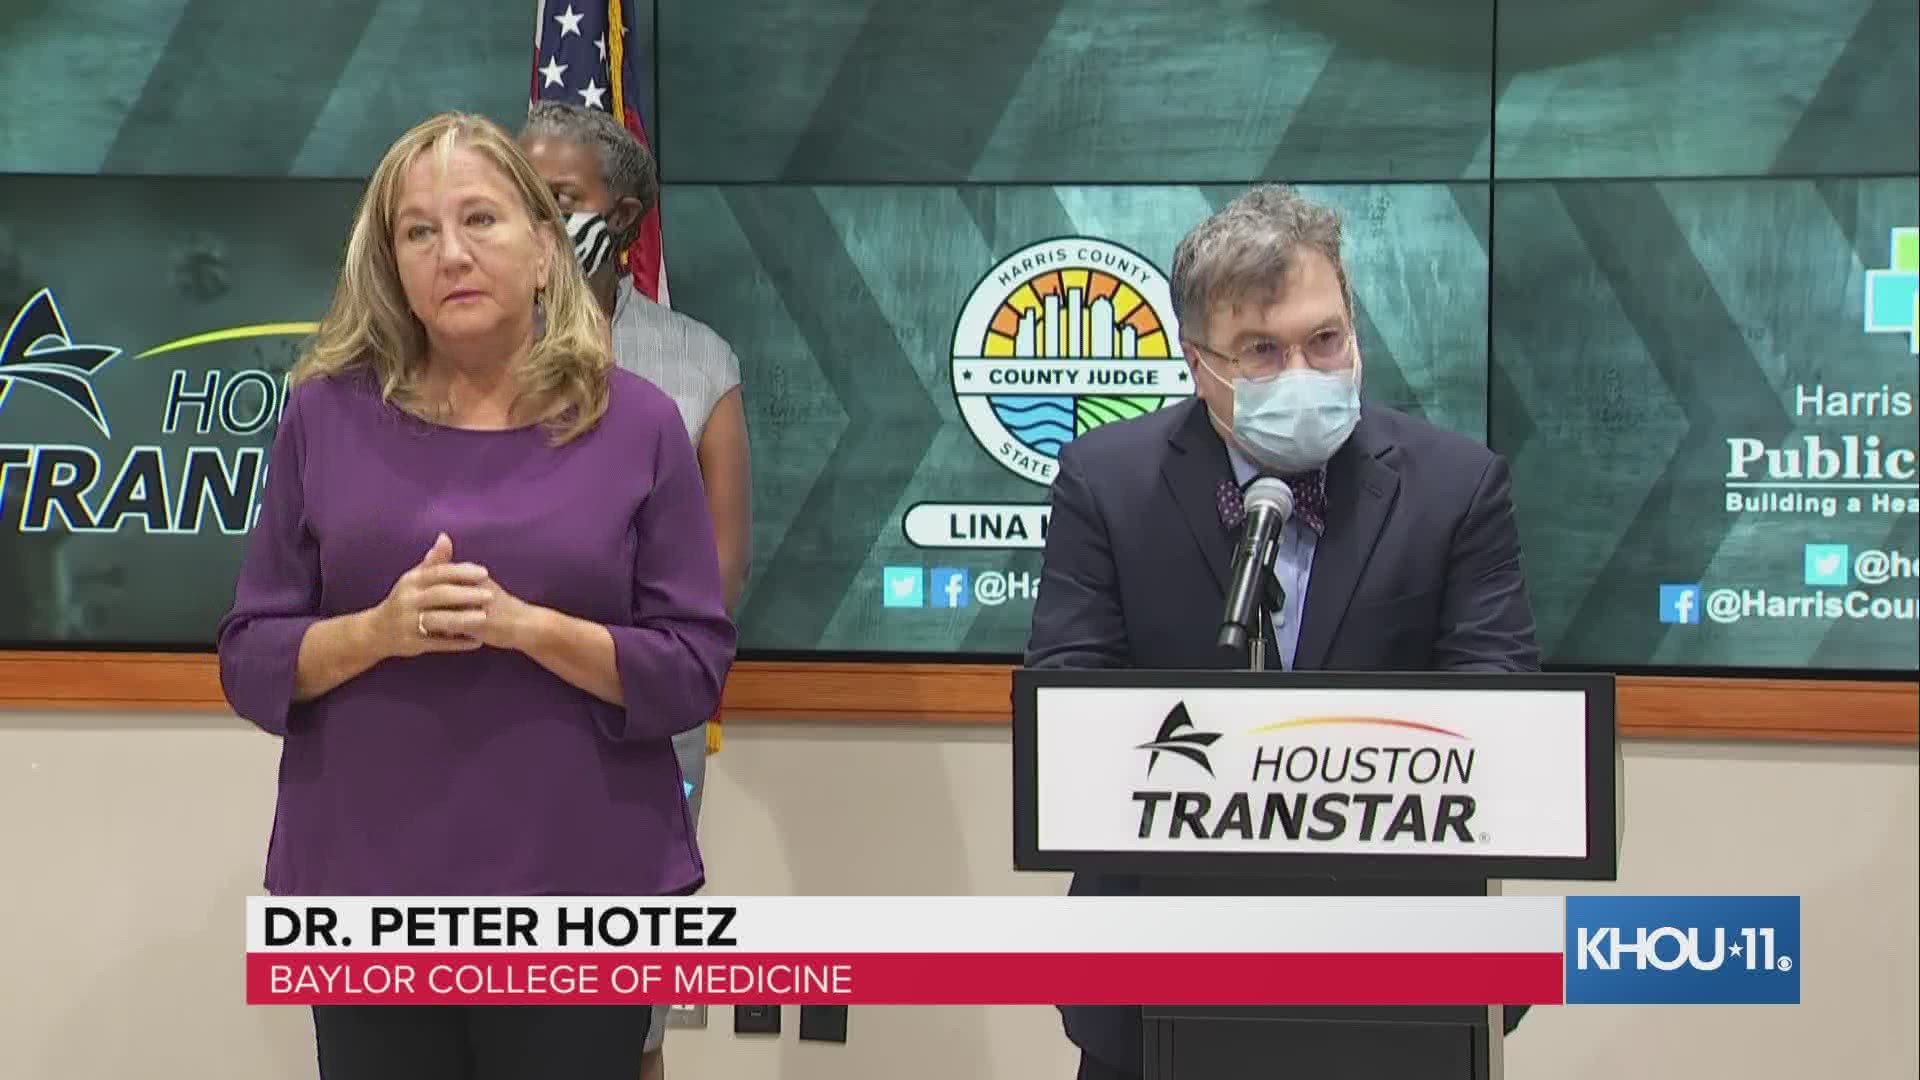 Judge Lina Hidalgo was joined by public health and emergency officials along with Dr. Peter Hotez from Baylor College of Medicine at an 11 a.m. press conference.